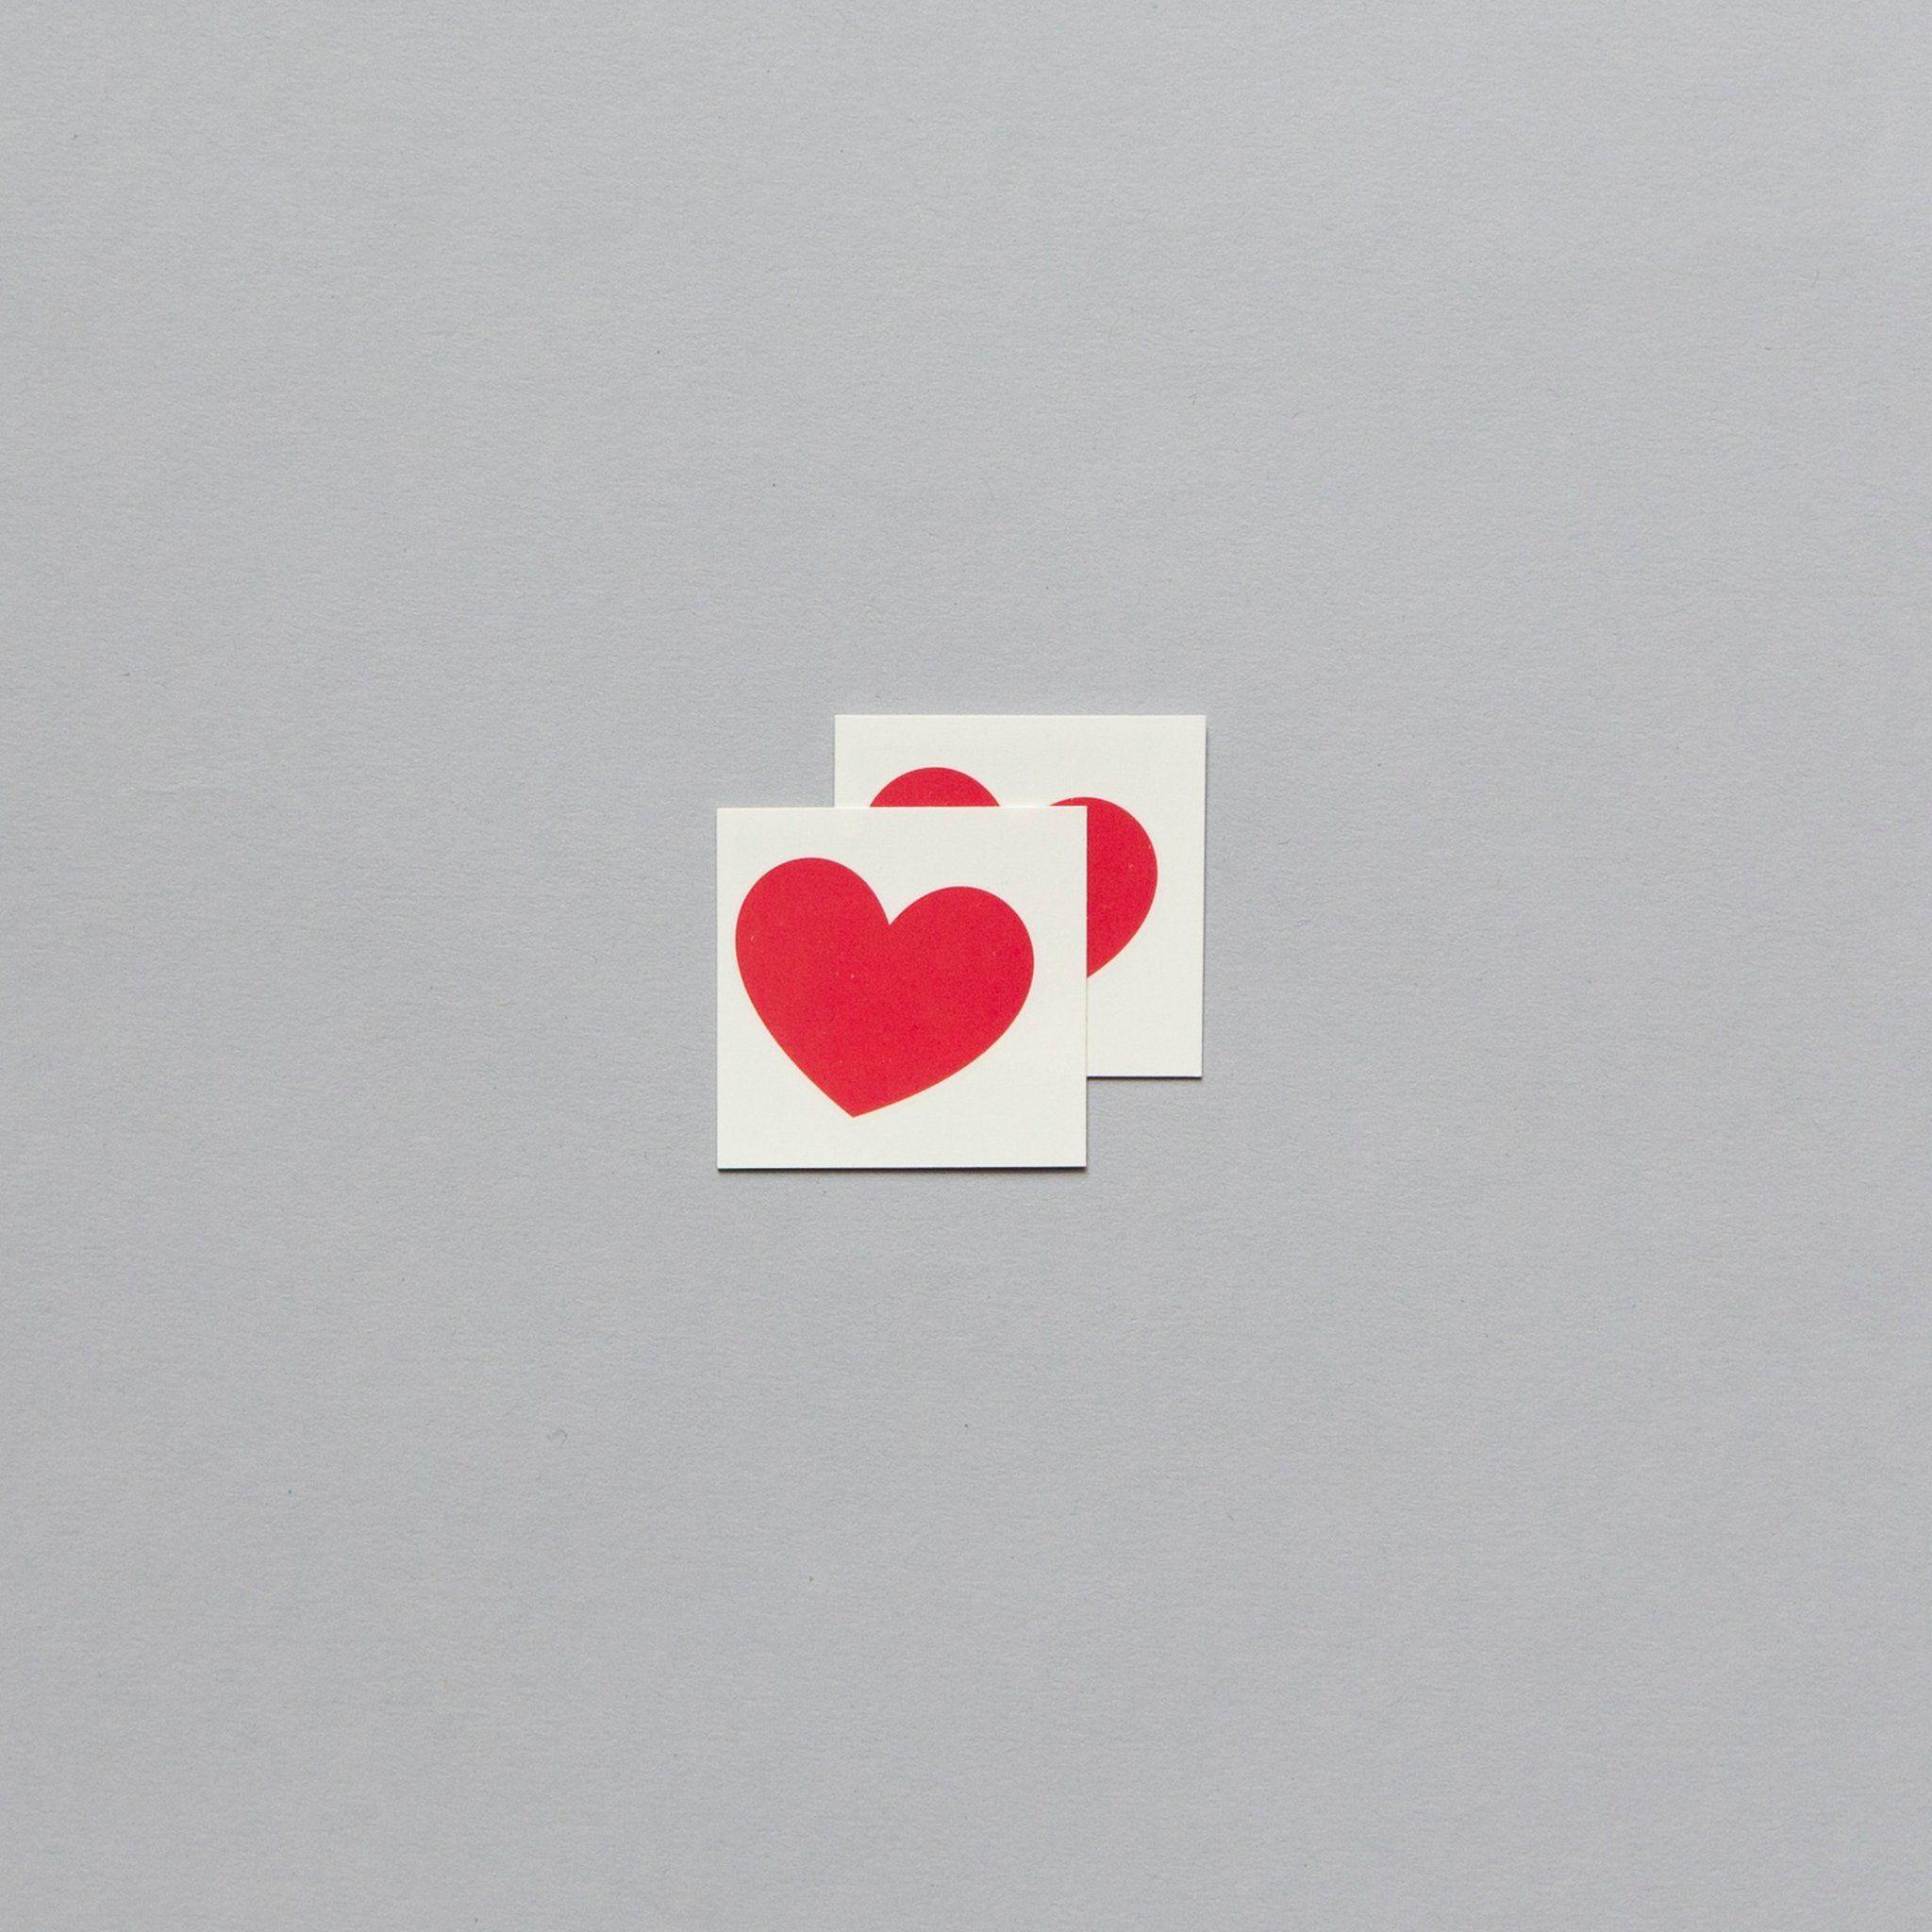 Gray and Red Heart Logo - Classic Red Heart by Team Tattly from Tattly Temporary Tattoos